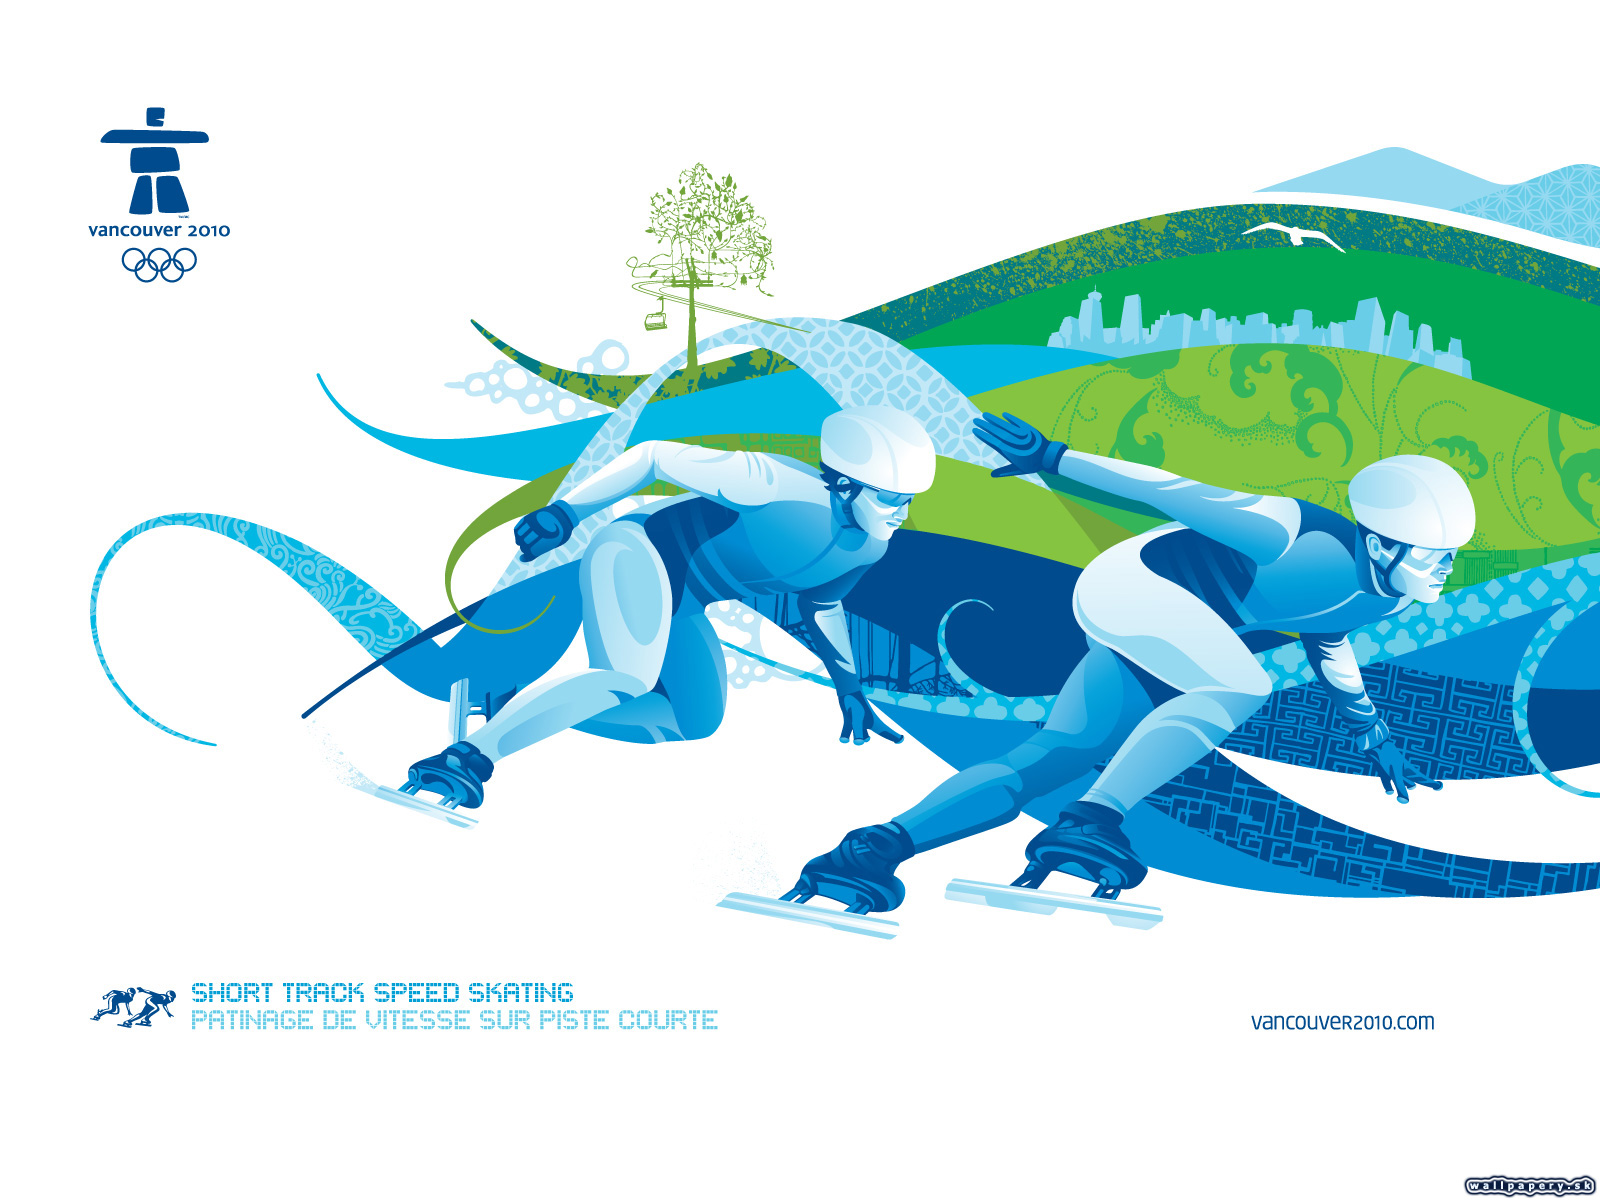 Vancouver 2010 - The Official Video Game of the Olympic Winter Games - wallpaper 14